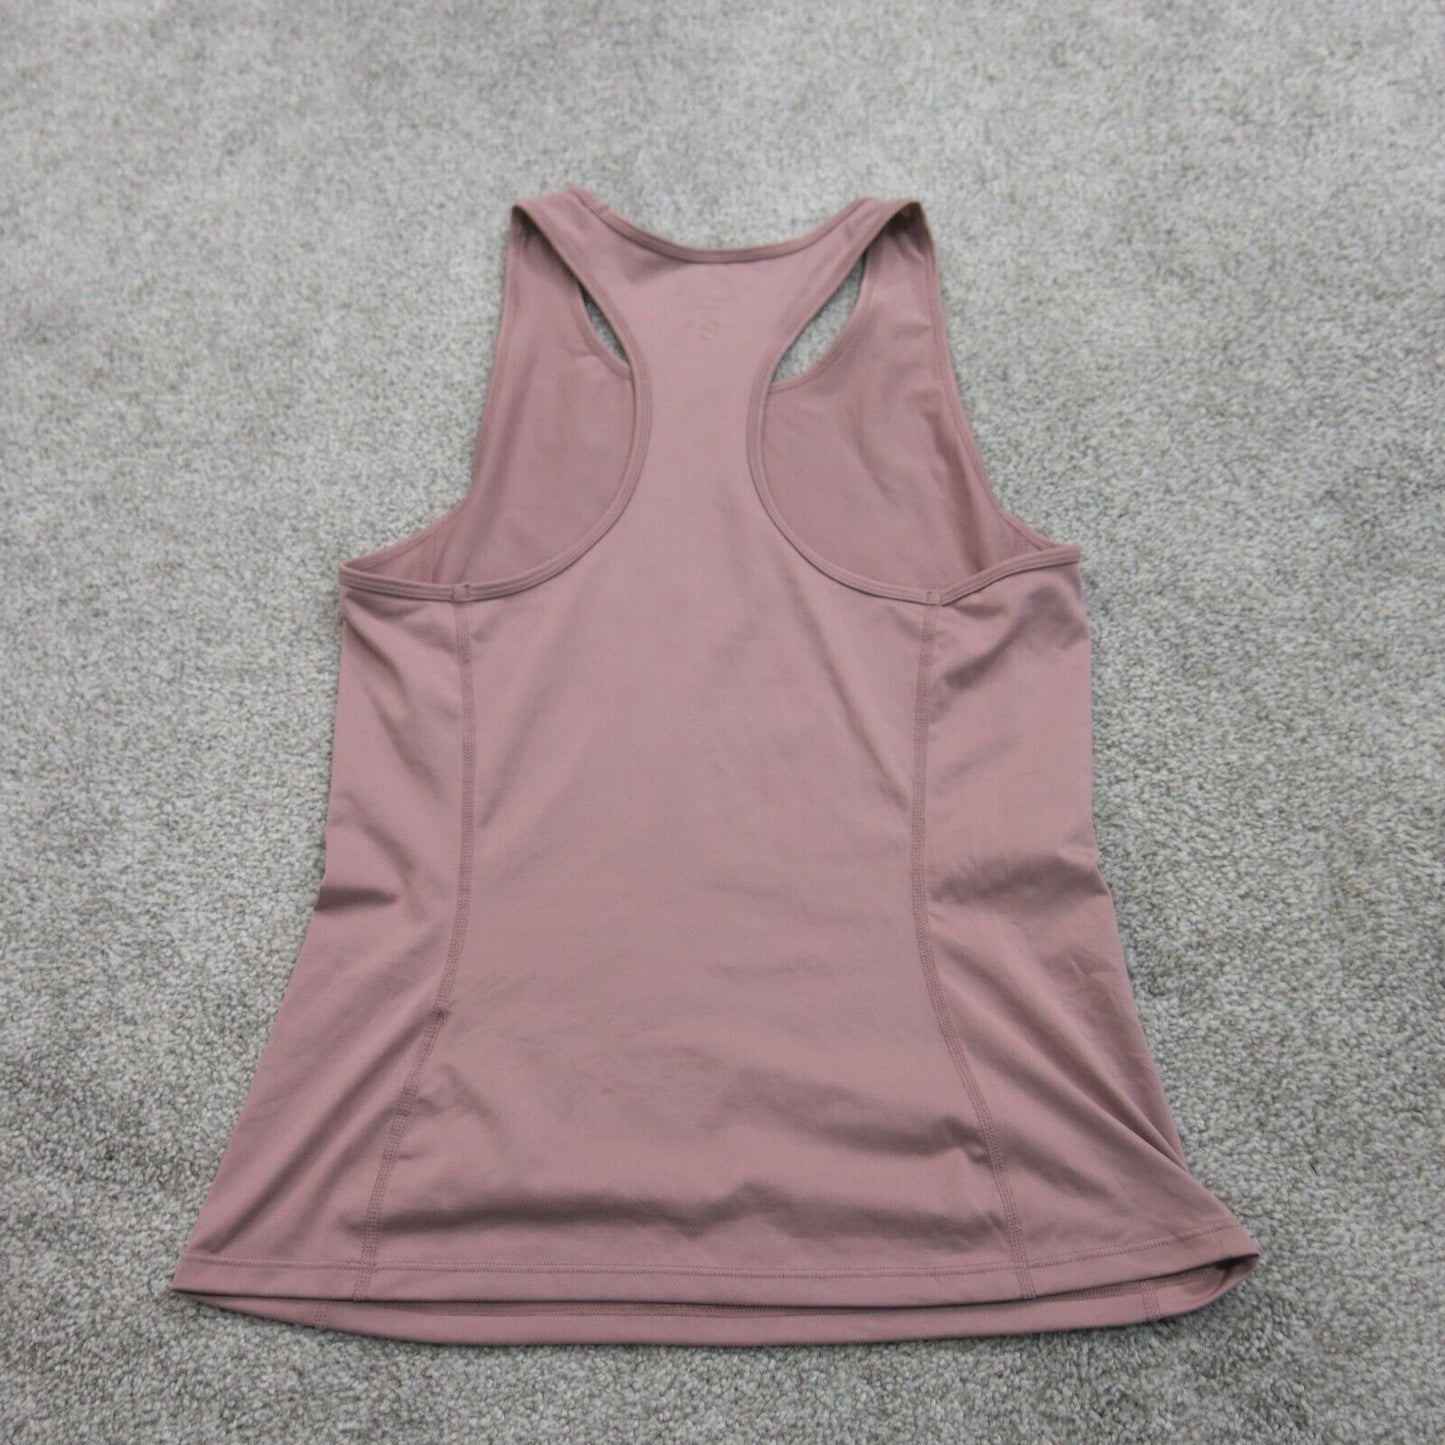 H&M Sports Womens Activewear Tank Top Sleeveless Racerback Nude Pink Size Small